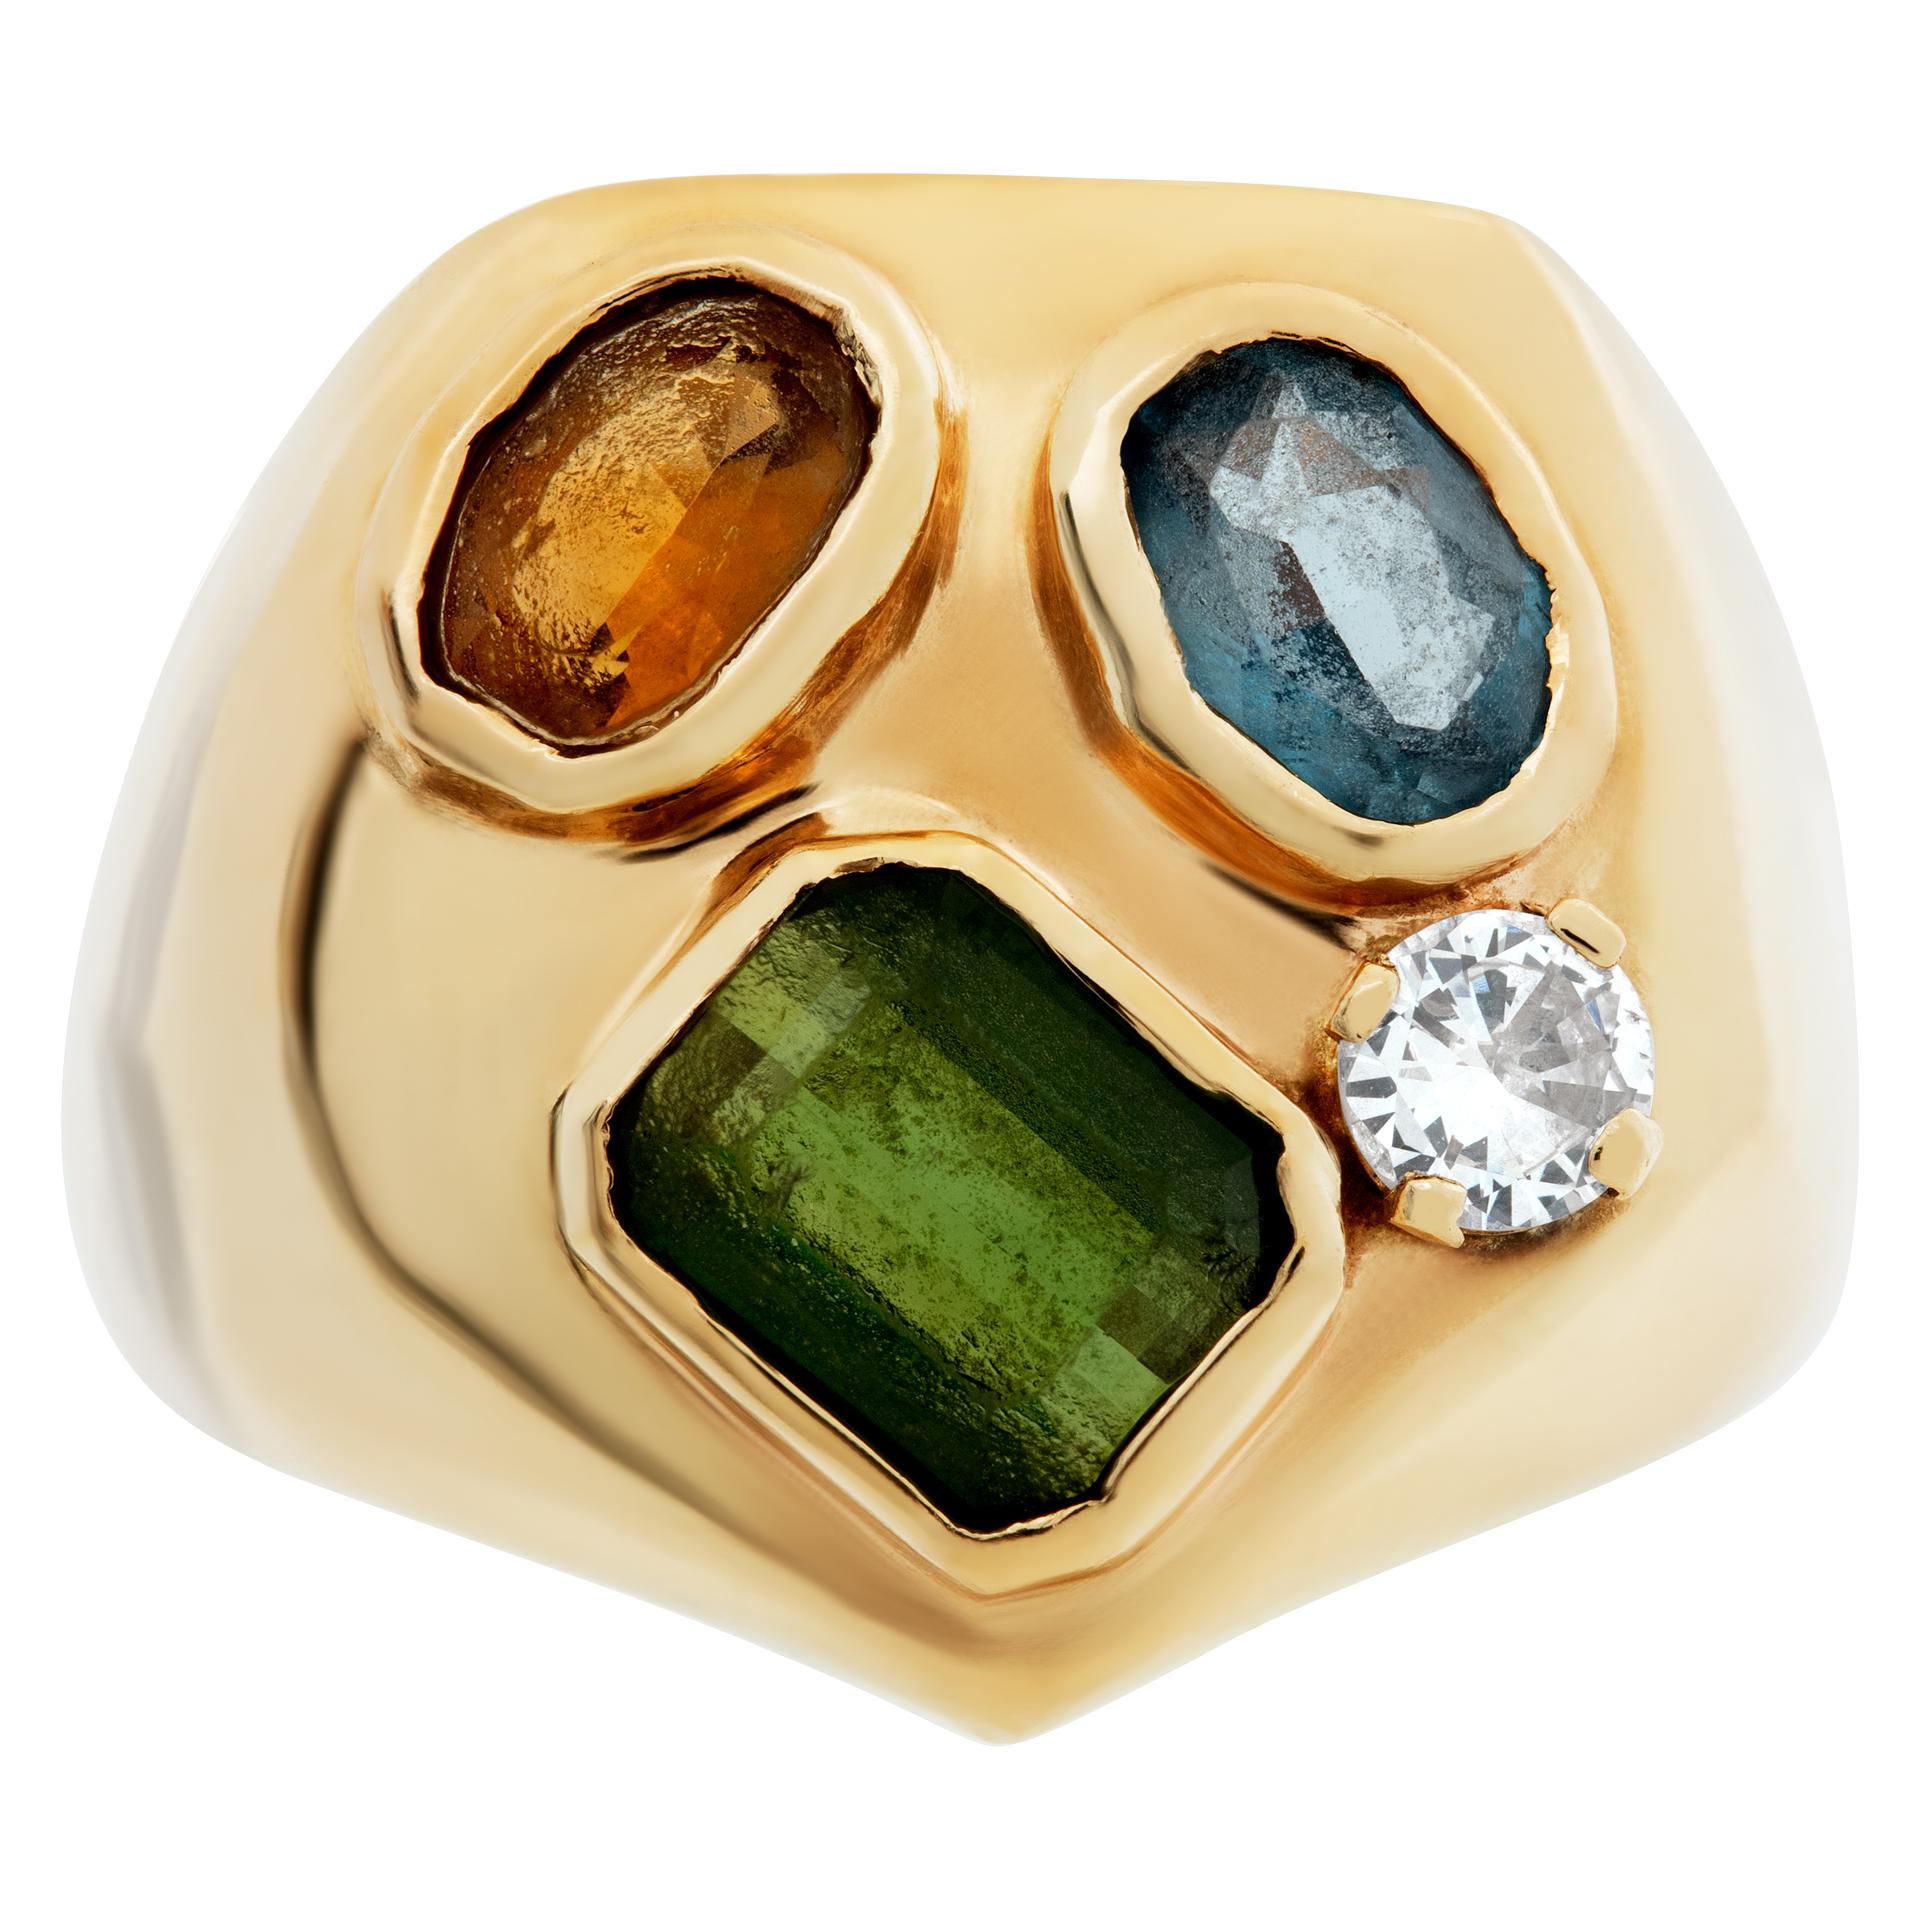 Mosaic of semi-precious gemstone ring: tourmeline, blue topaz, orange citrine & 0.25 carat diamond set in 14k yellow gold. Size 7.25, head measures 20mm x 20mm, shank 4mm.This ring is currently size 7.25 and some items can be sized up or down,